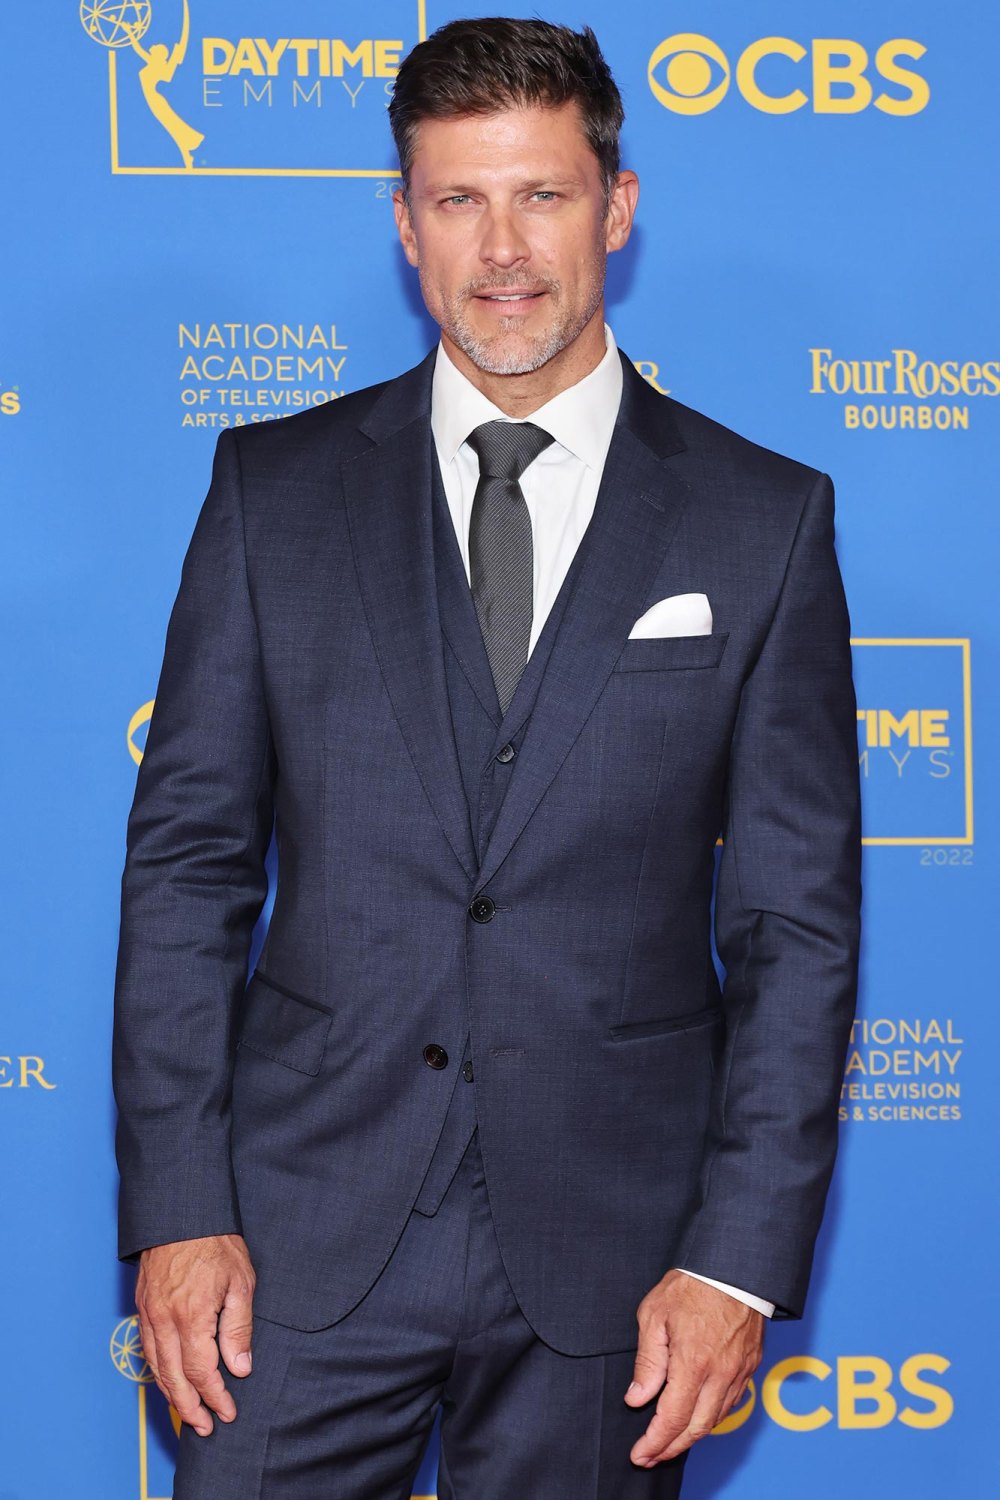 Days of Our Lives Star Greg Vaughan Hospitalized With Severe Altitude Sickness